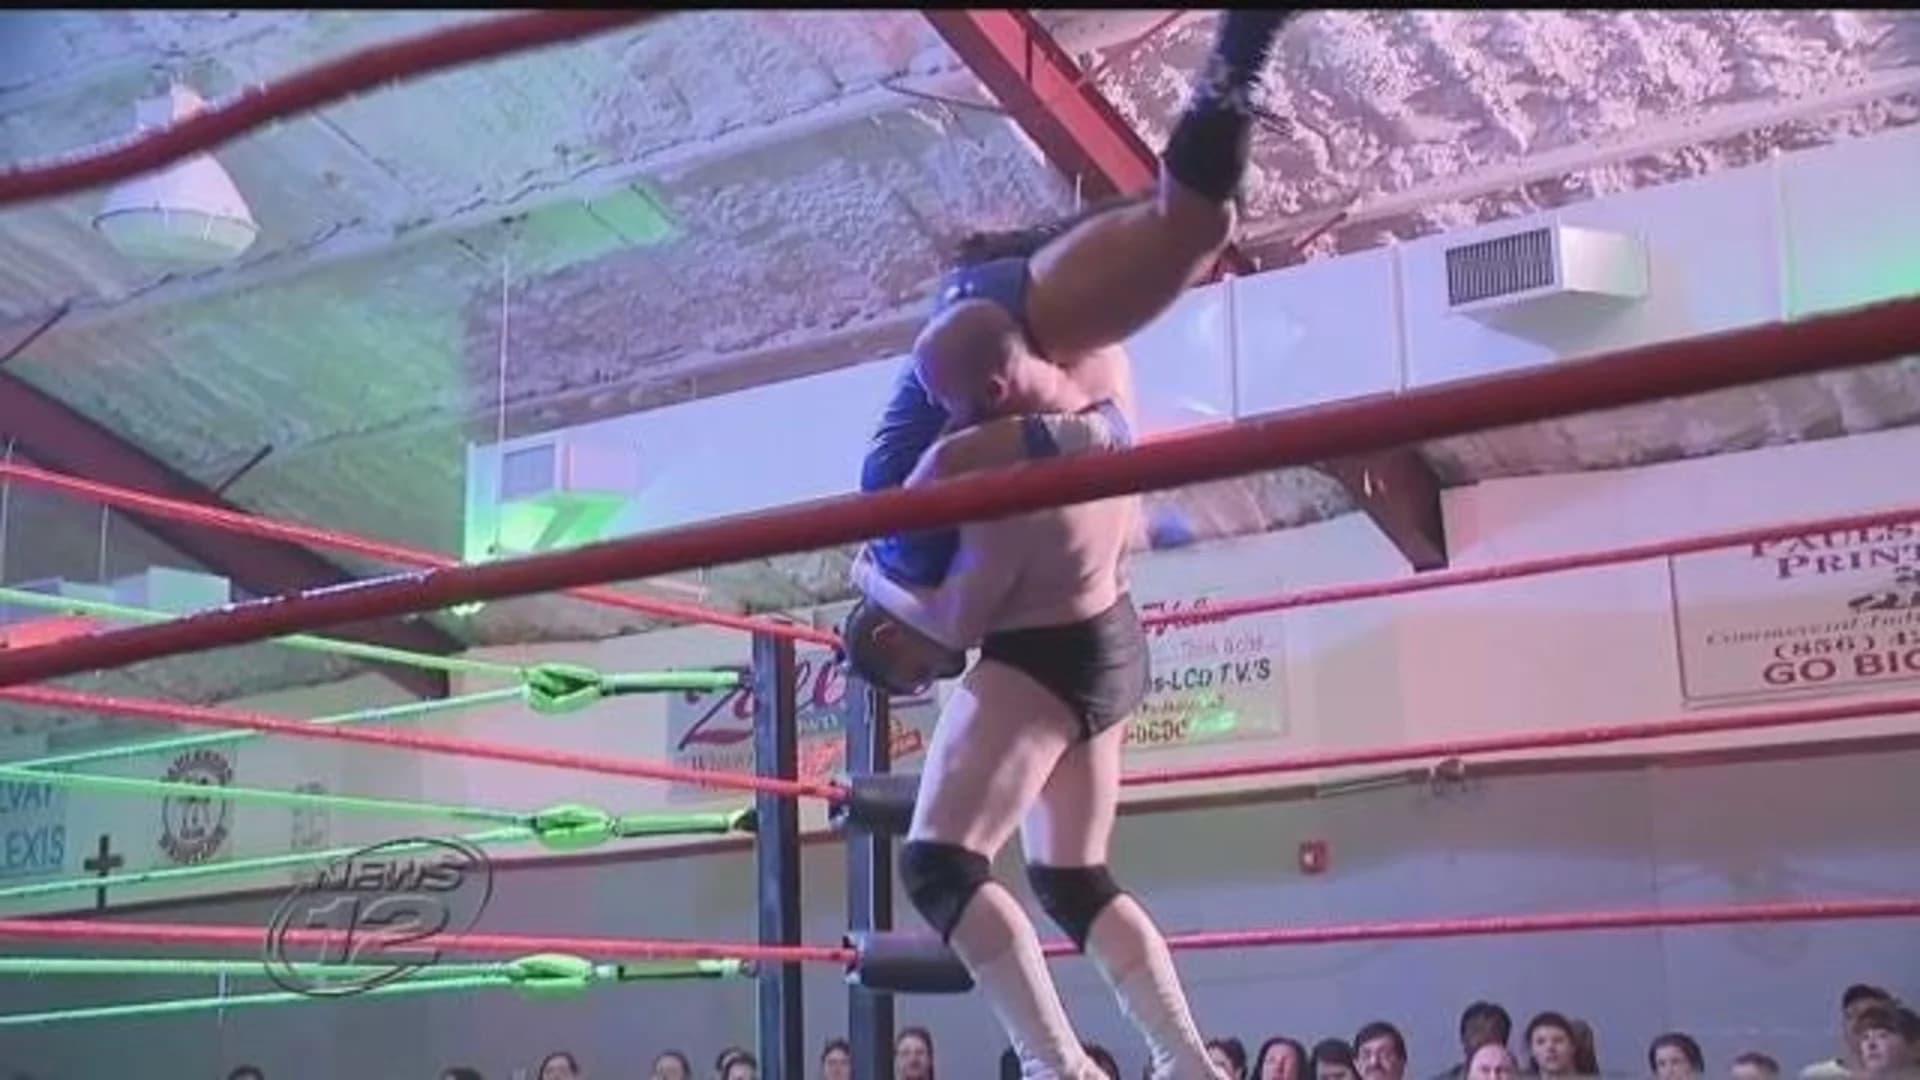 Wrestlers pay their dues in NJ’s World Famous Monster Factory